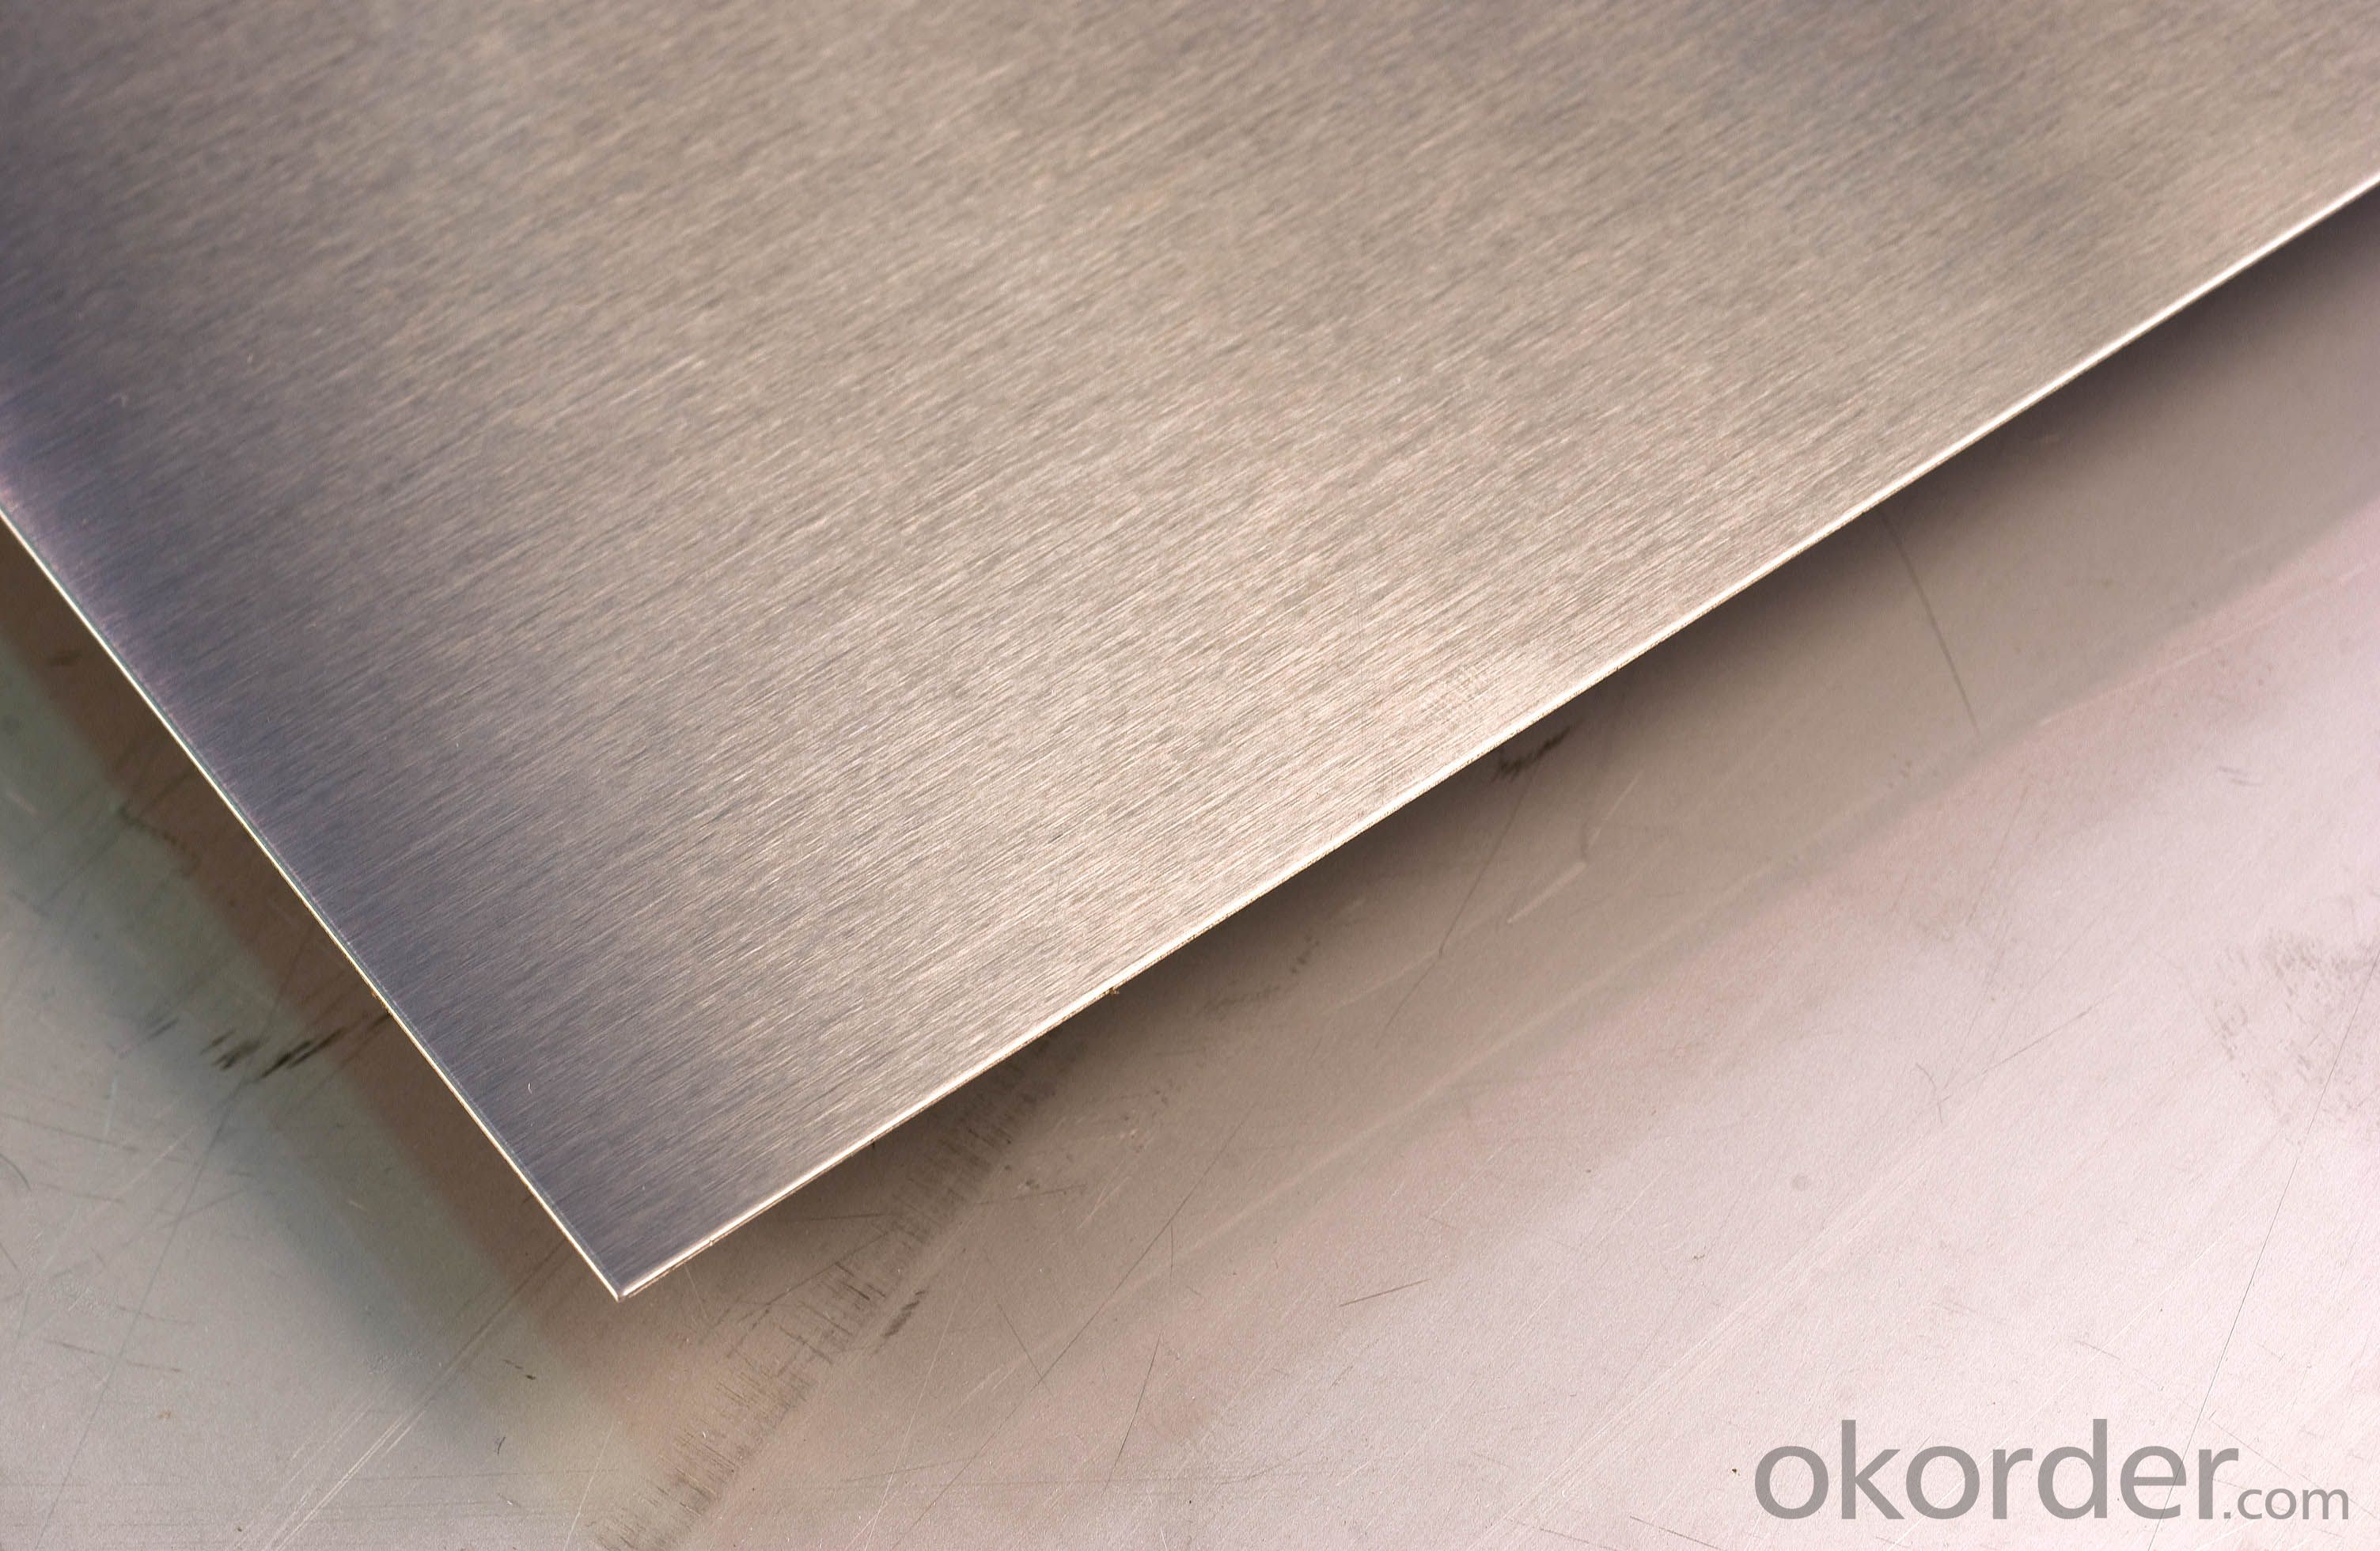 8 stainless steel sheet metal for kitchen behind sink